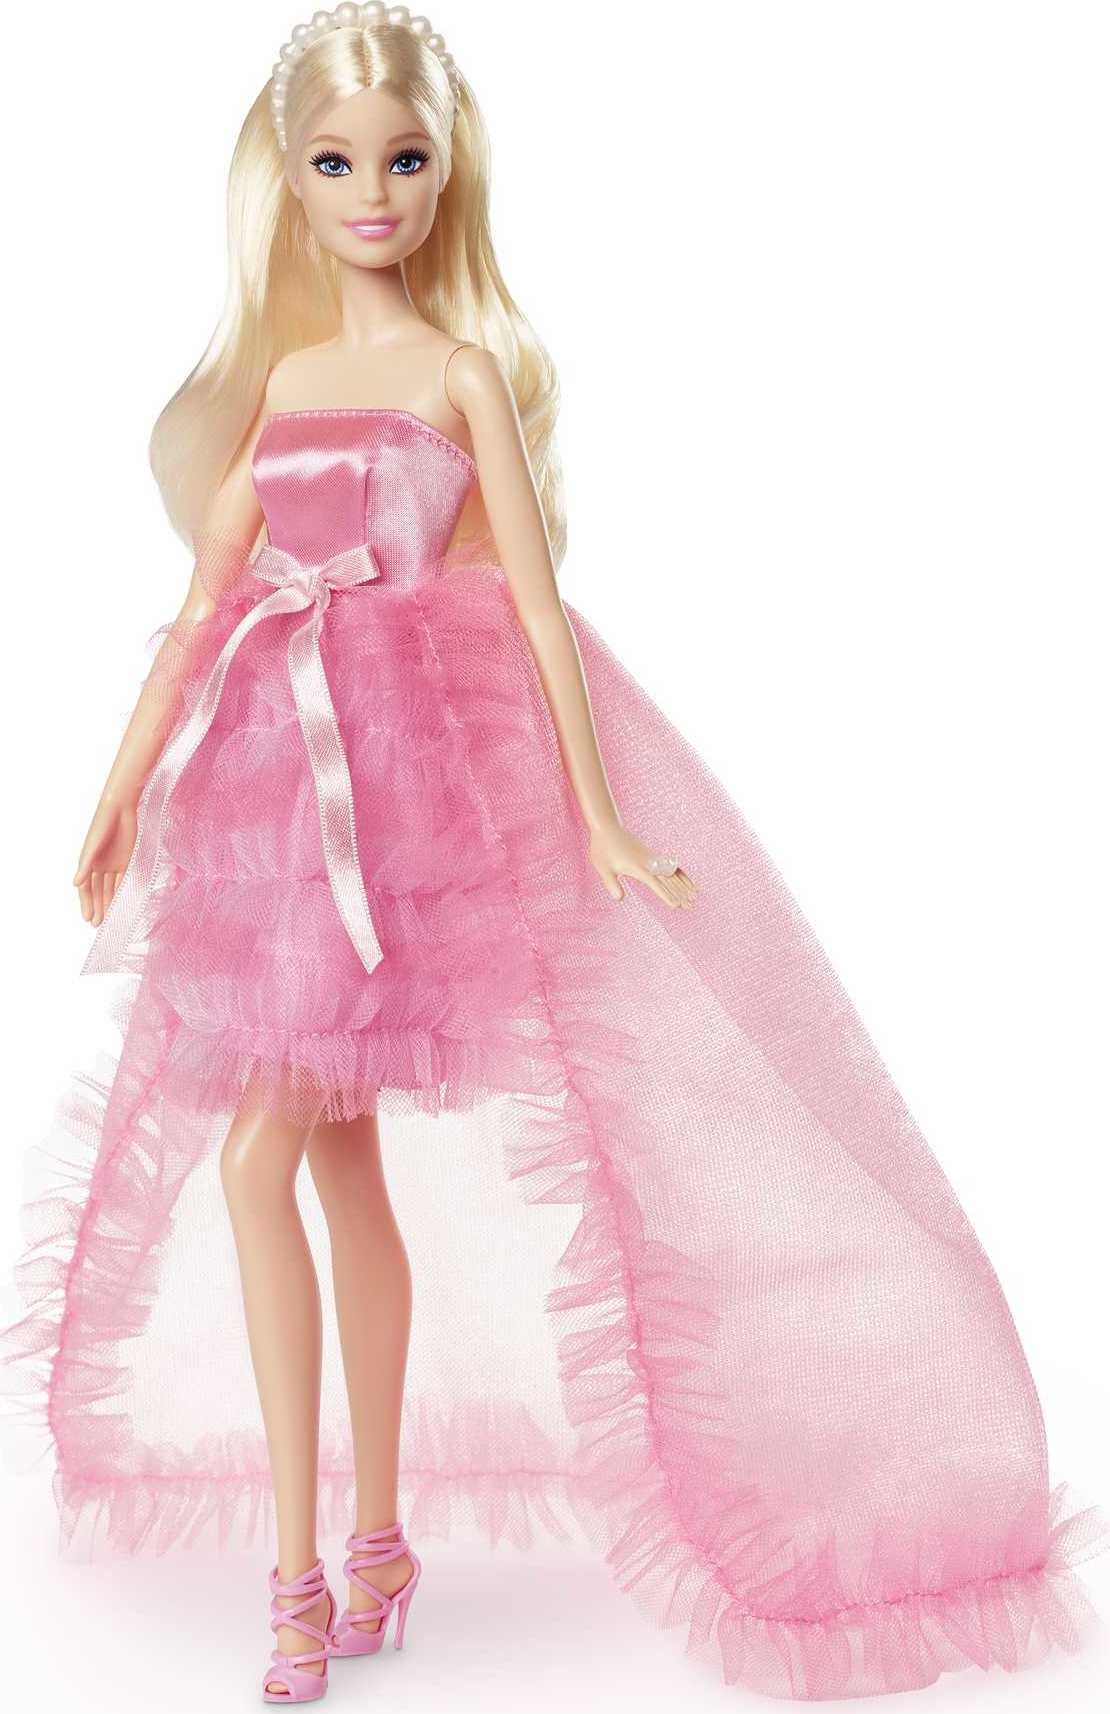 Barbie Doll, Birthday Wishes, Giftable, Blonde in Pink Dress - Walmart.com